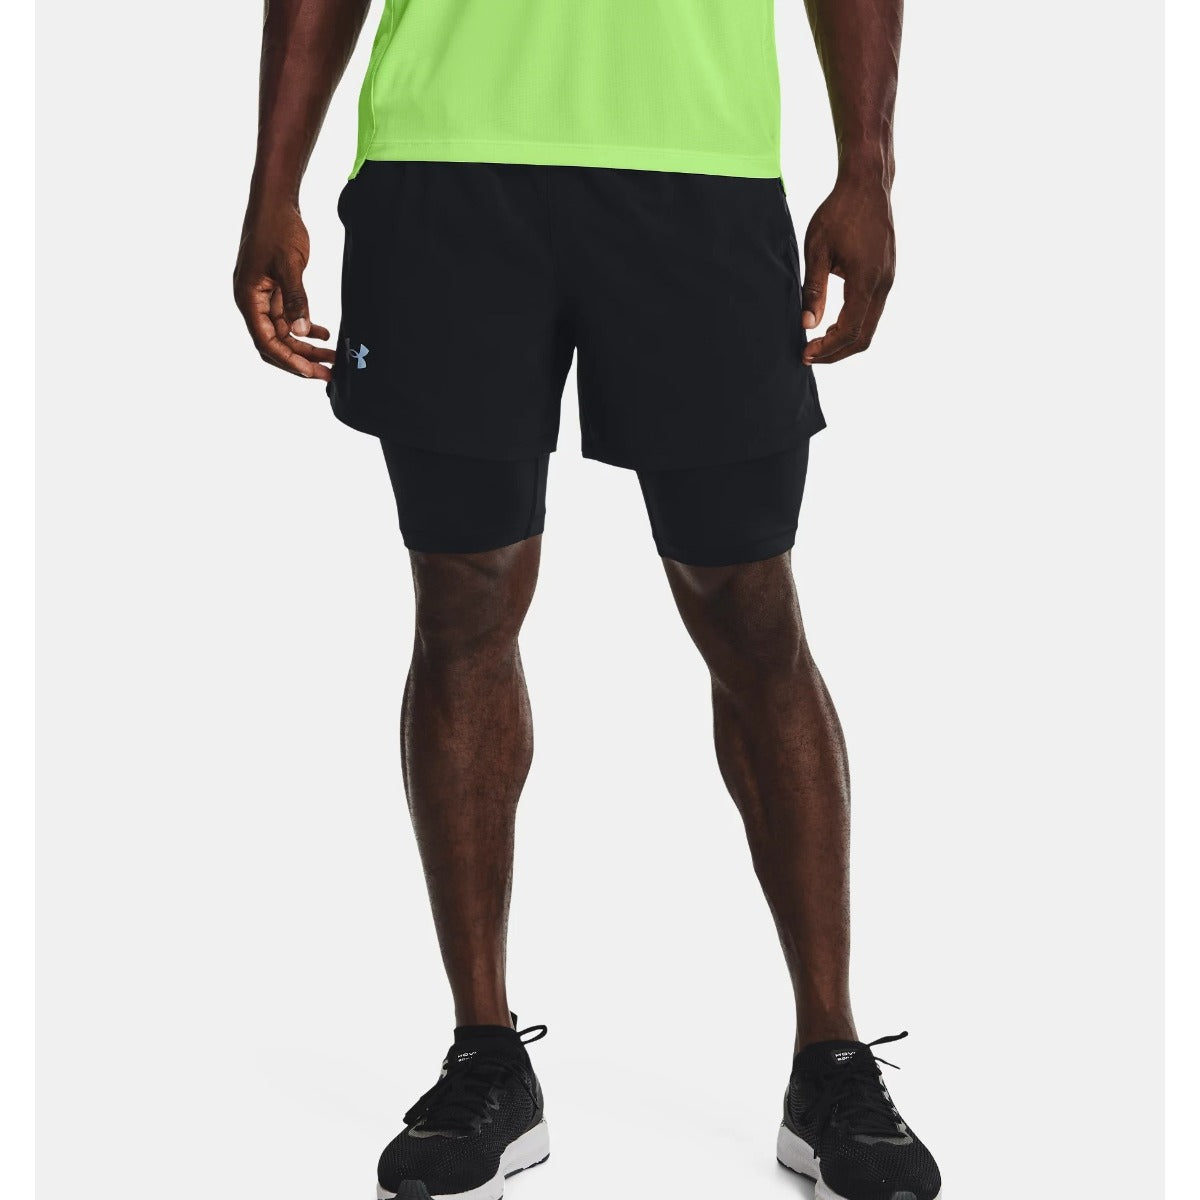 Under Armour Launch 5" 2-in-1 Shorts Men's (Black 001)